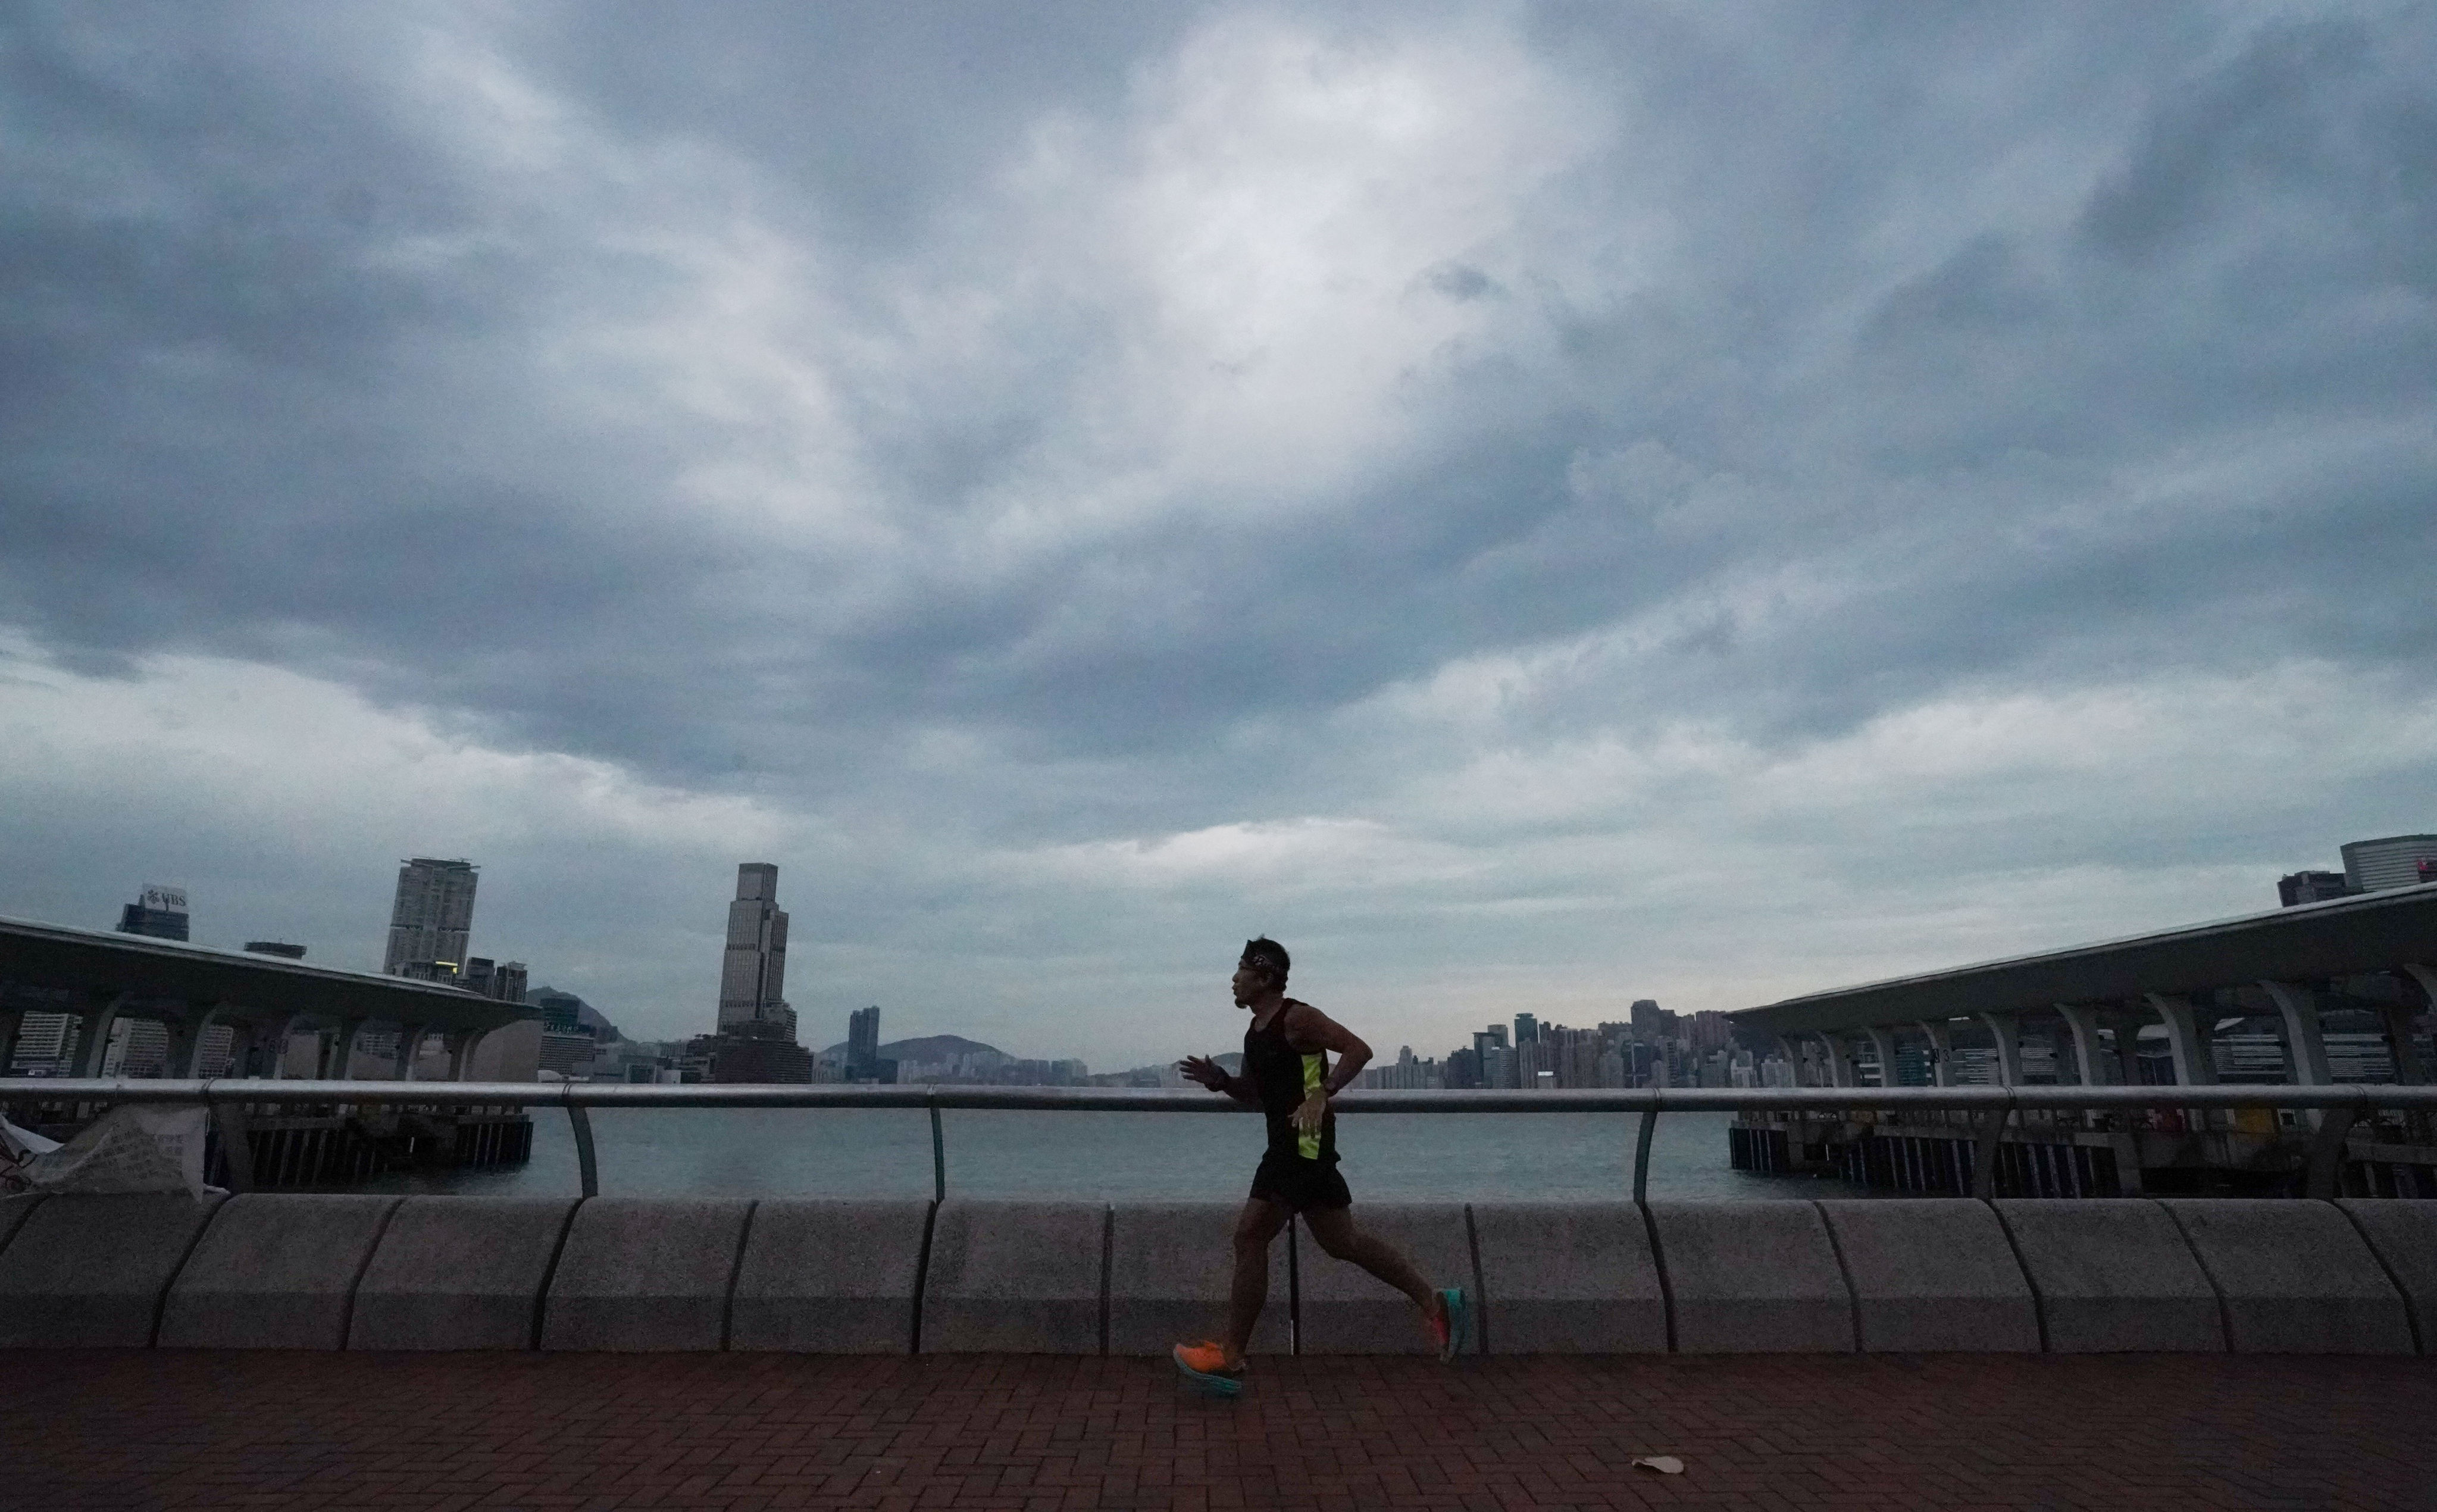 The wet weather comes after weeks of sweltering conditions in Hong Kong. Photo: Felix Wong